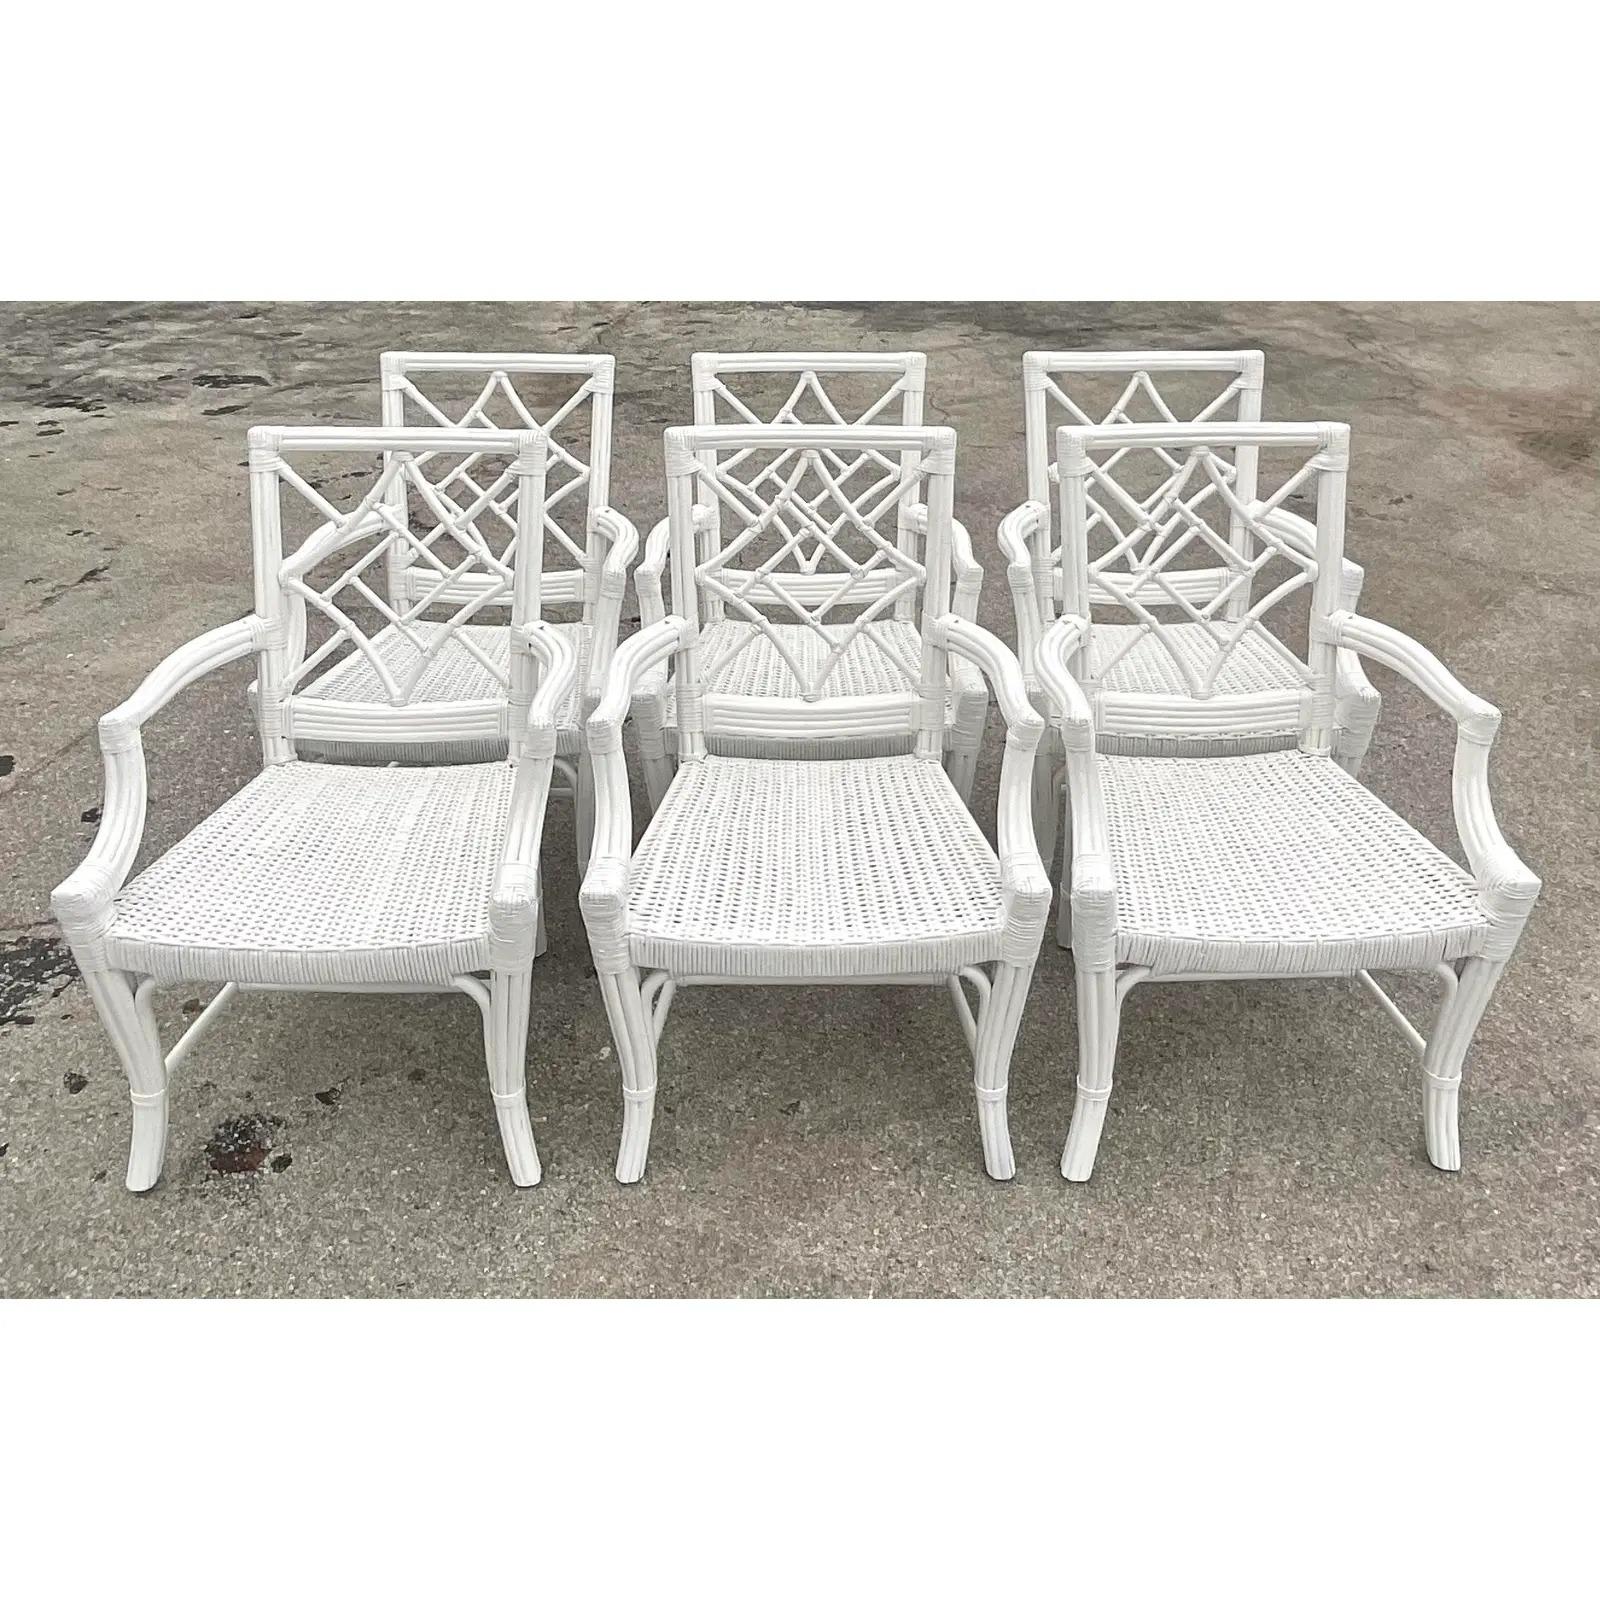 Vintage Coastal White Lacquered Diamond Back Dining Chairs - Set of 6 1